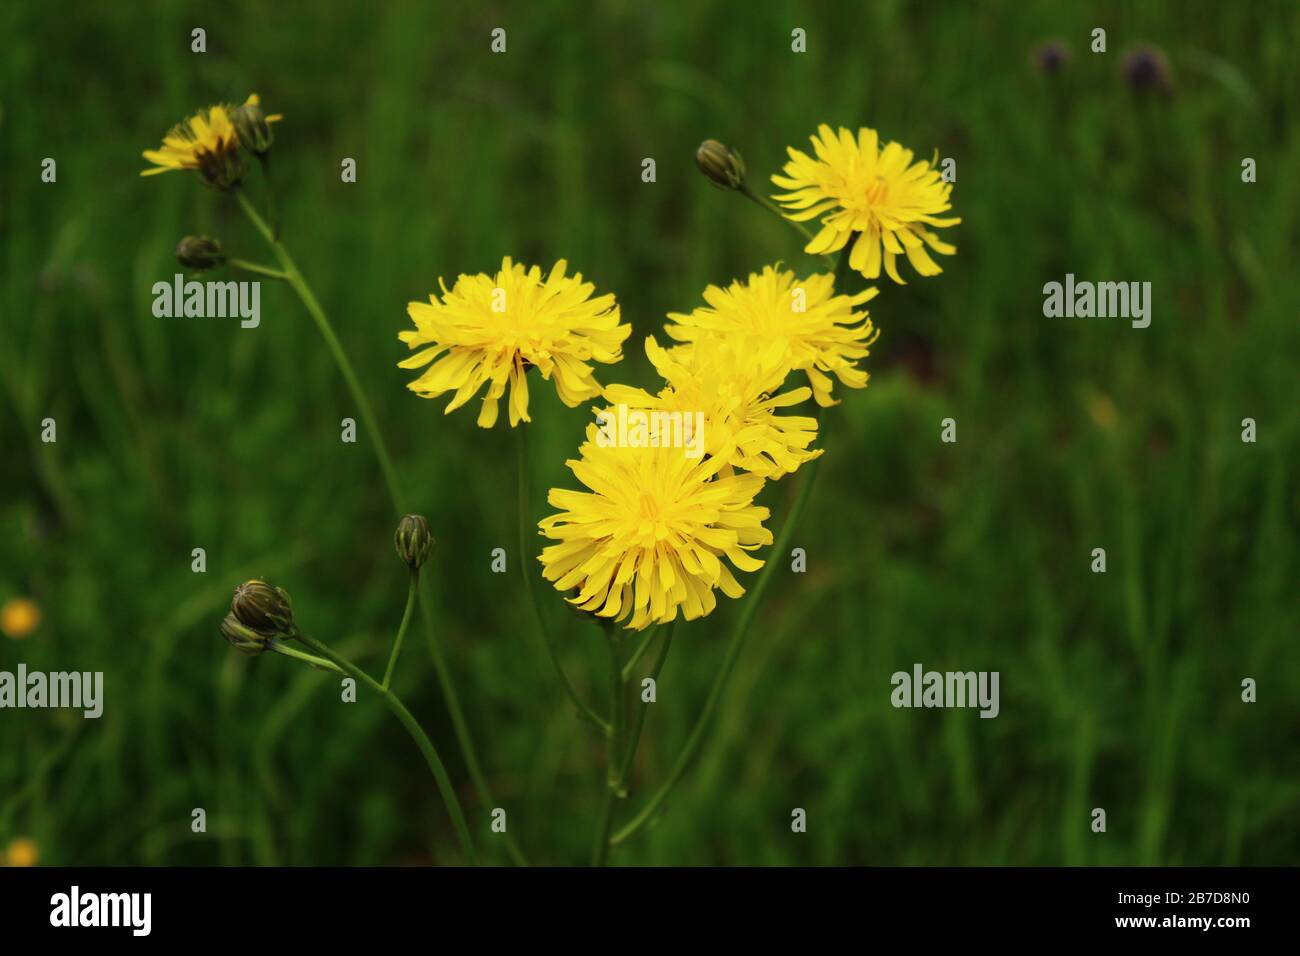 The picture shows few-leaved hawkweed in the meadow Stock Photo